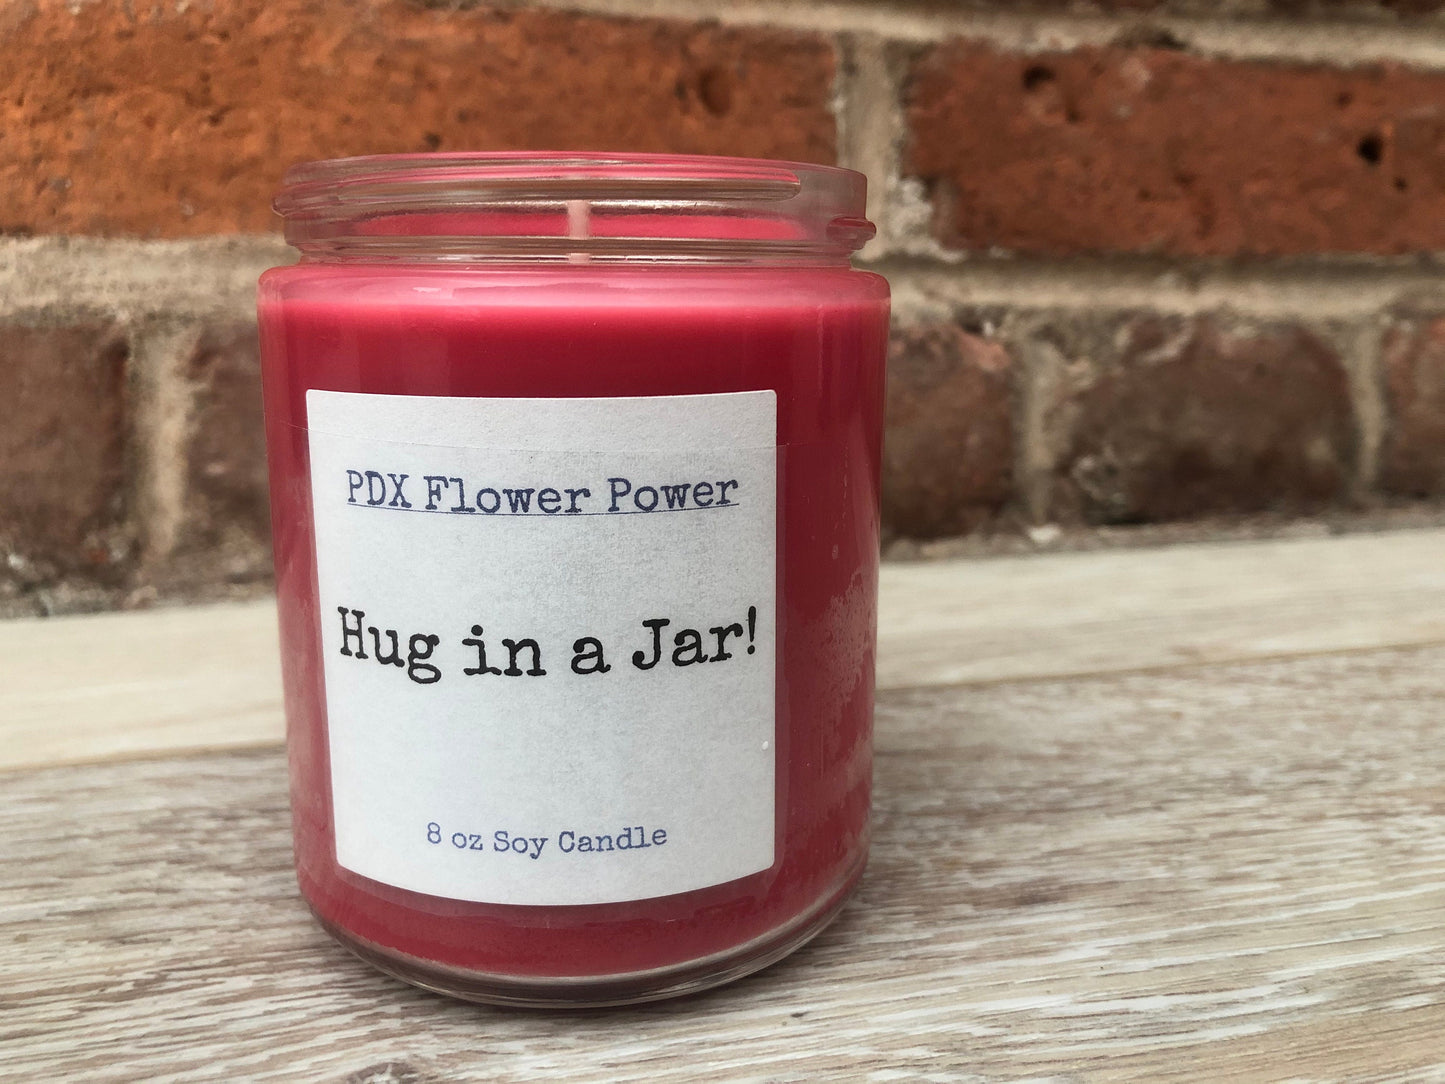 Natural Soy Candle Hug in a Jar, PDX Flower Power handcrafted soy candle, Assorted colored Hug in a jar candles, Handmade soy candle, custom